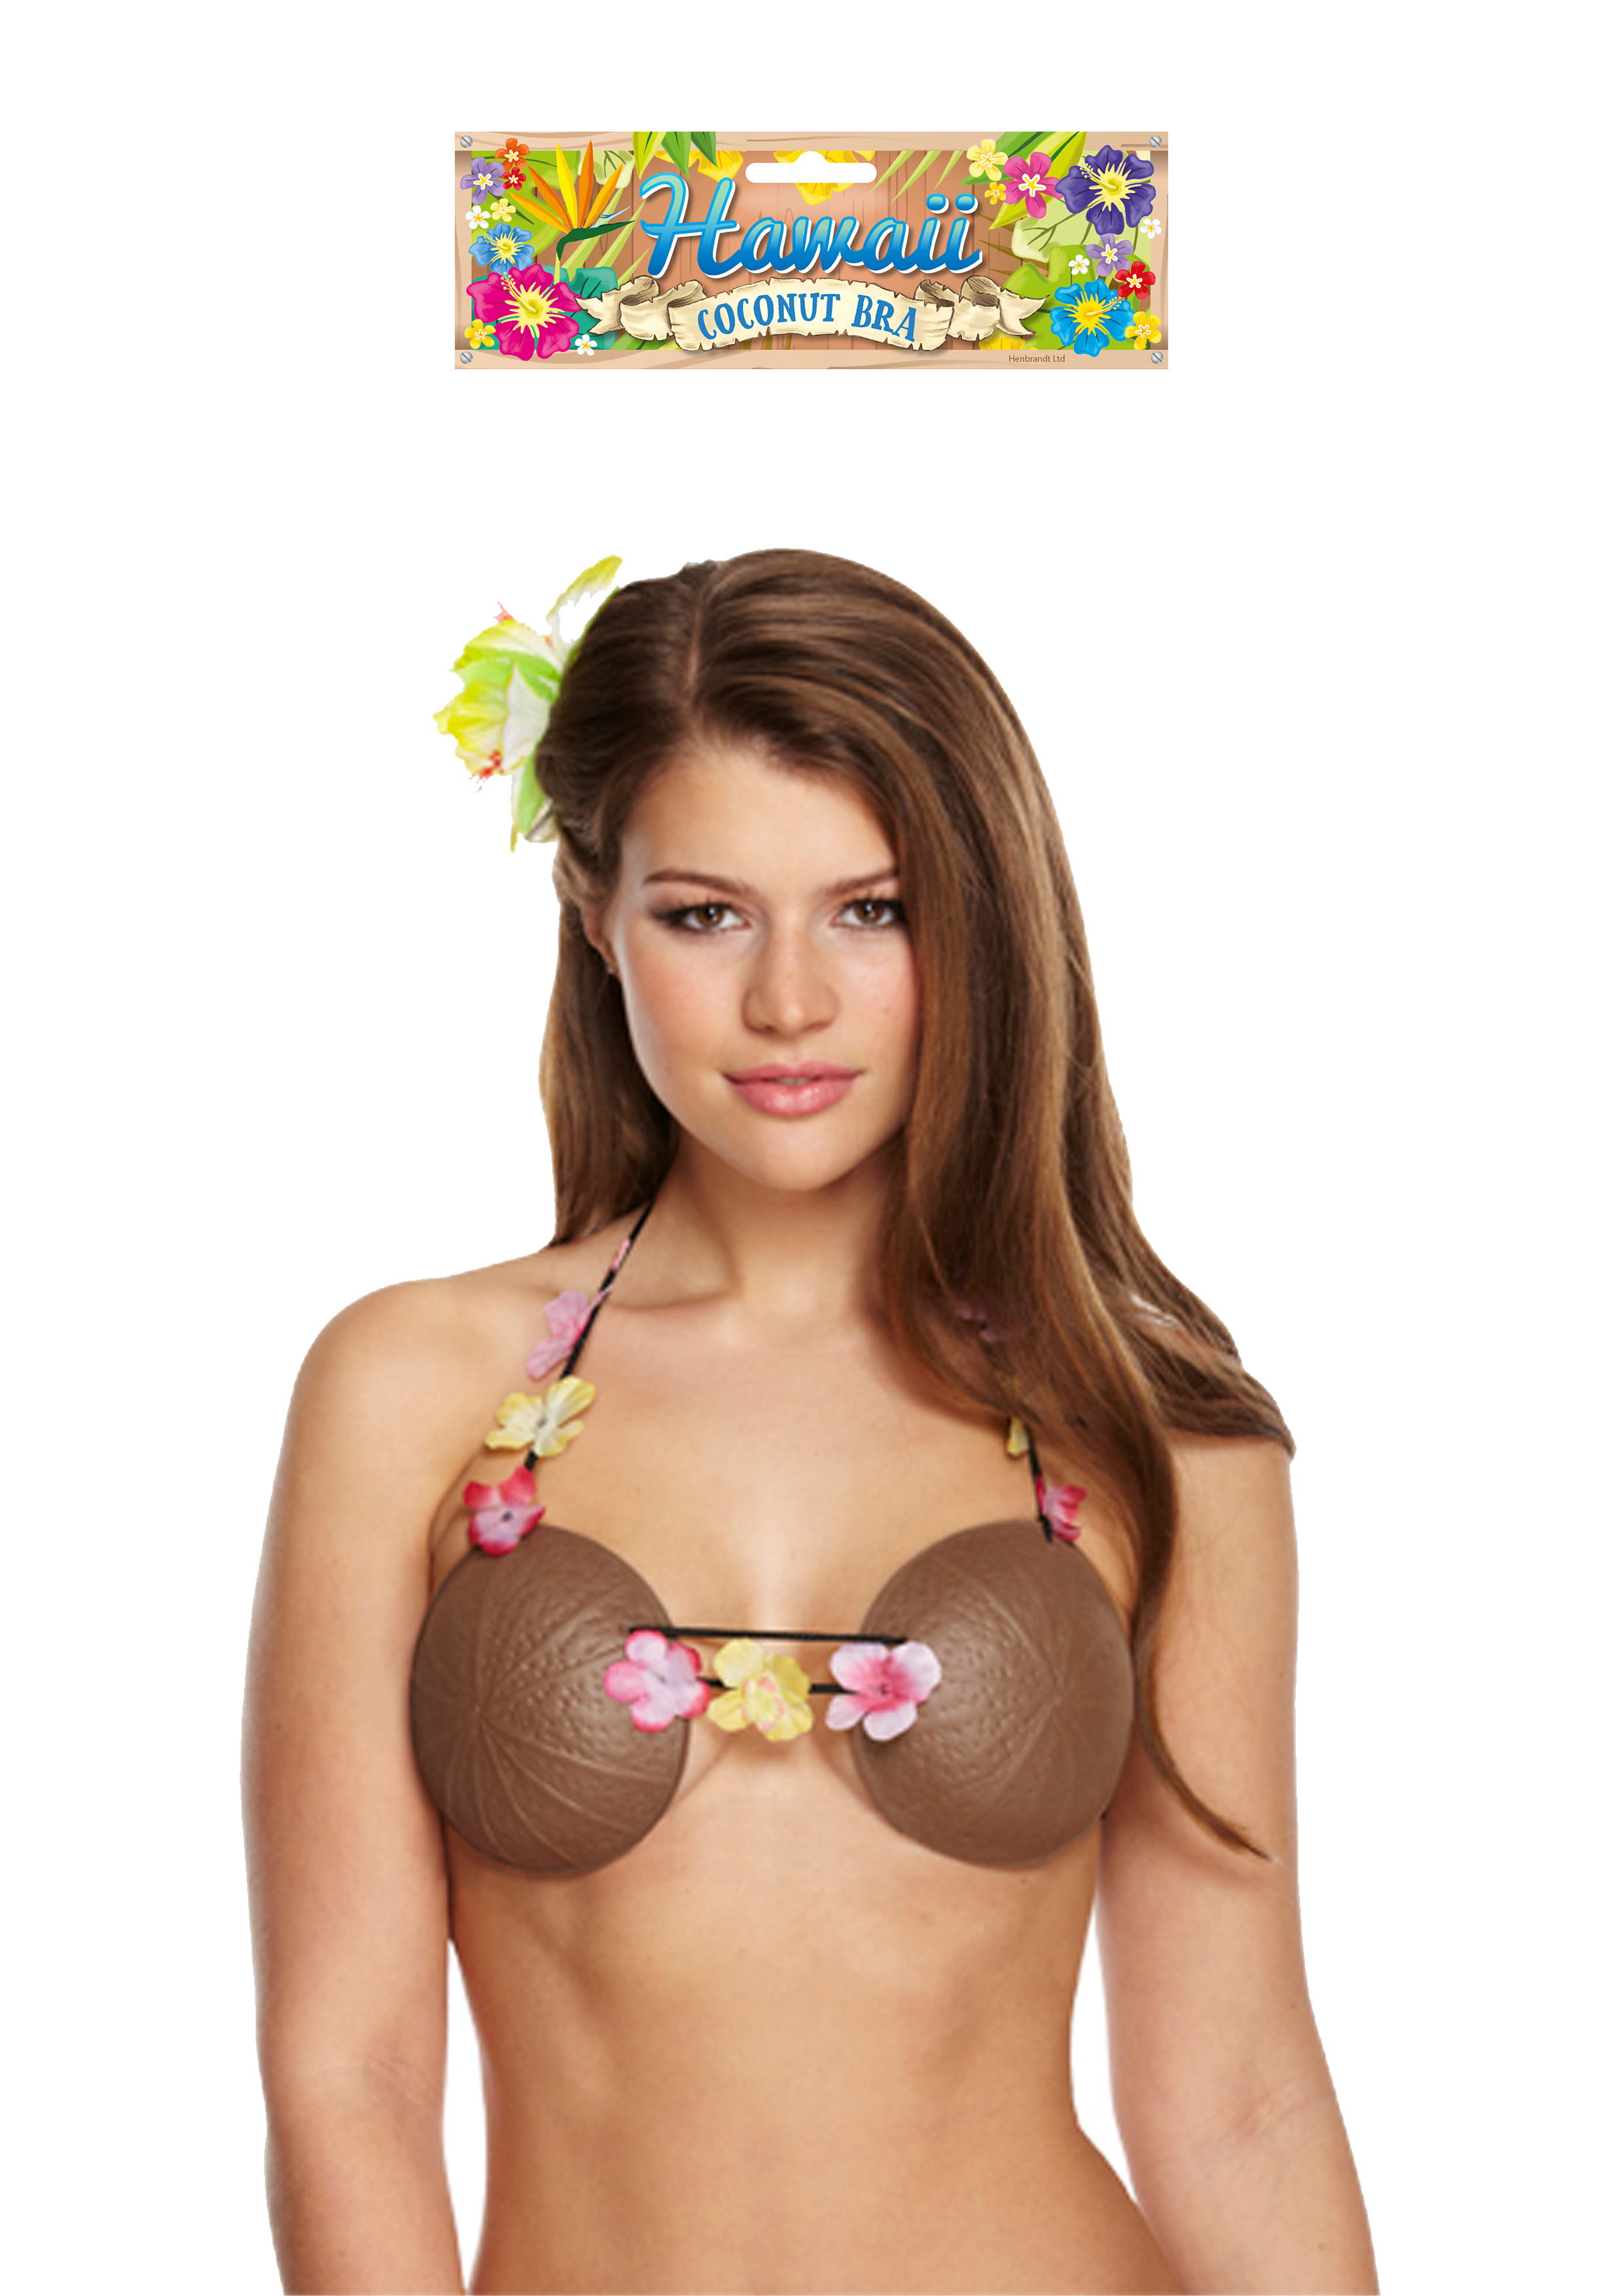 Real Coconut Bra For Adults 